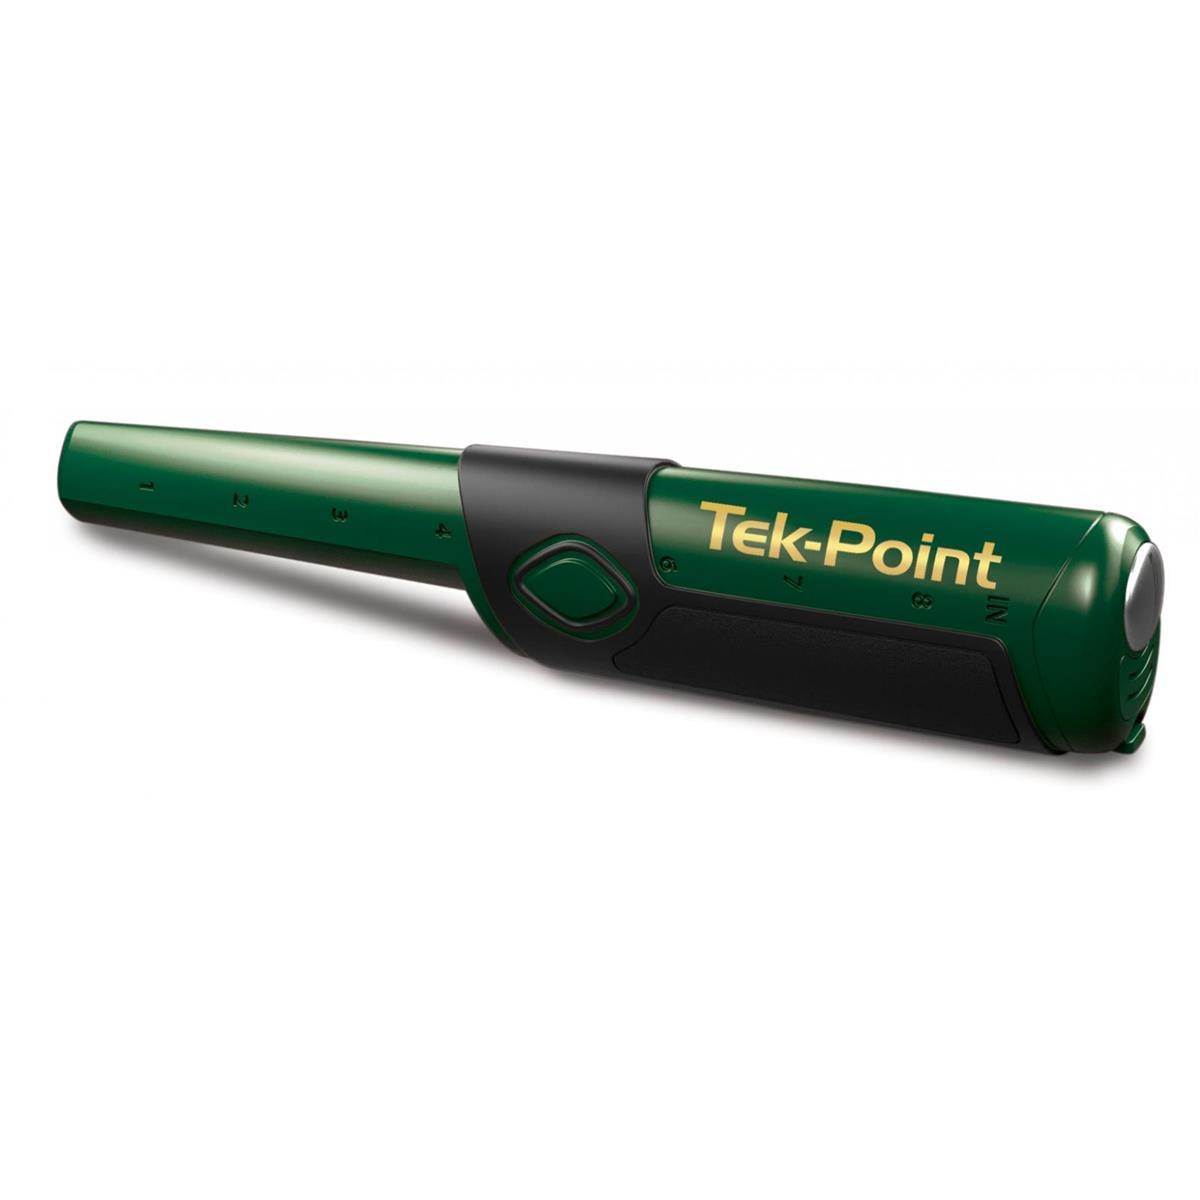 Image of Teknetics Tek-Point Waterproof Pulse Induction Pin Pointer with LED Light